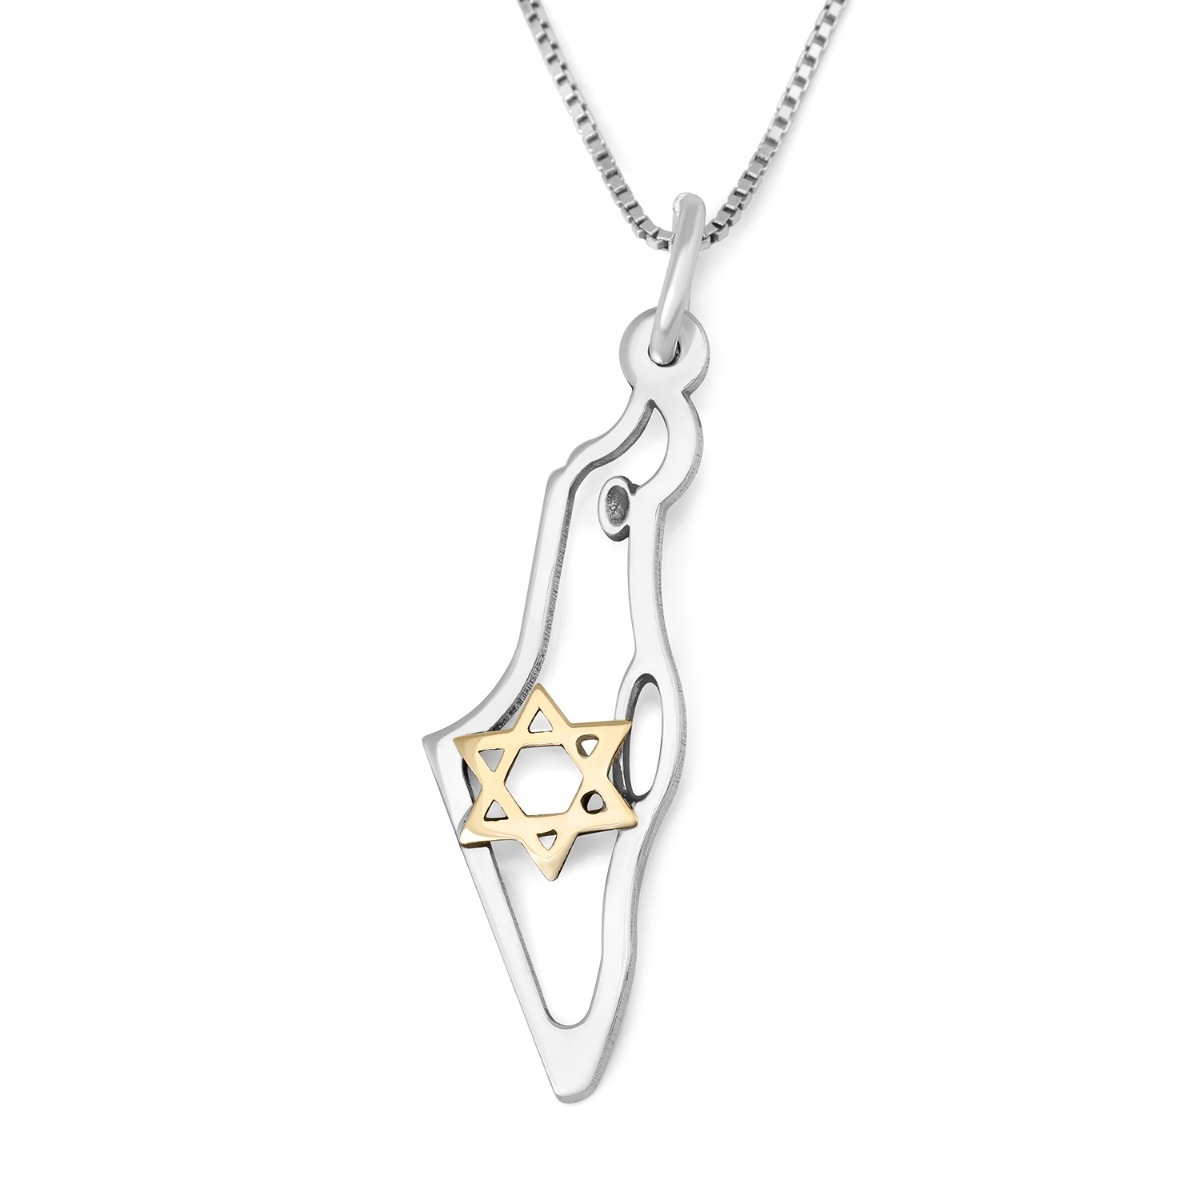 Two-Tone Sterling Silver and 9K Gold Map of Israel Pendant with Star of David - 1